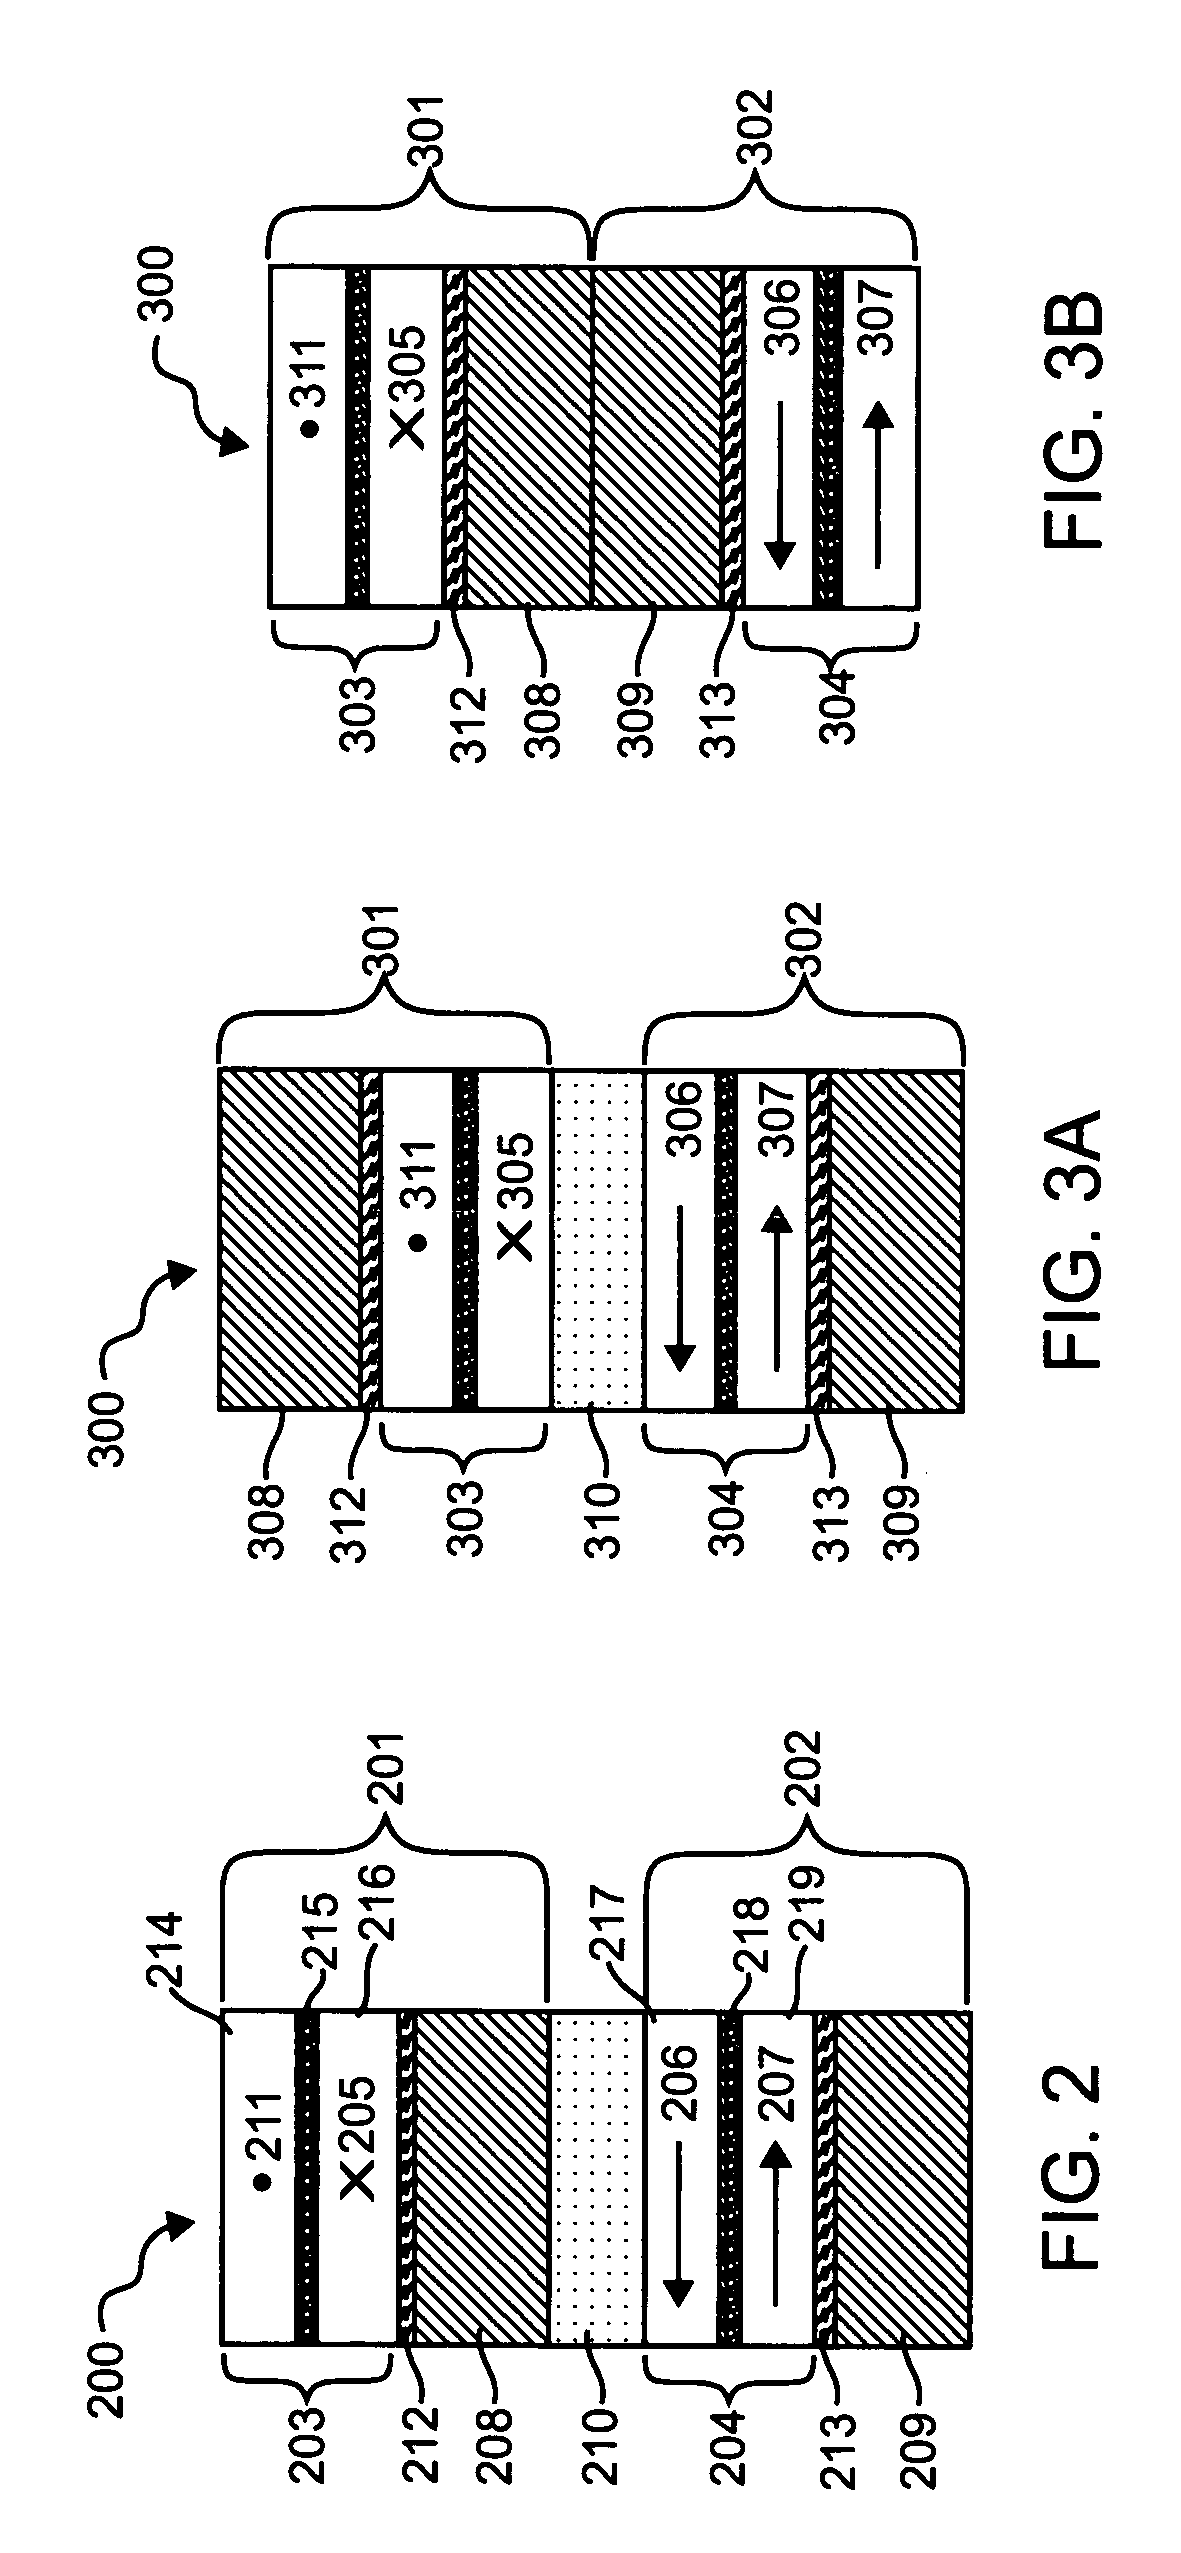 Multiple-bit magnetic random access memory cell employing adiabatic switching